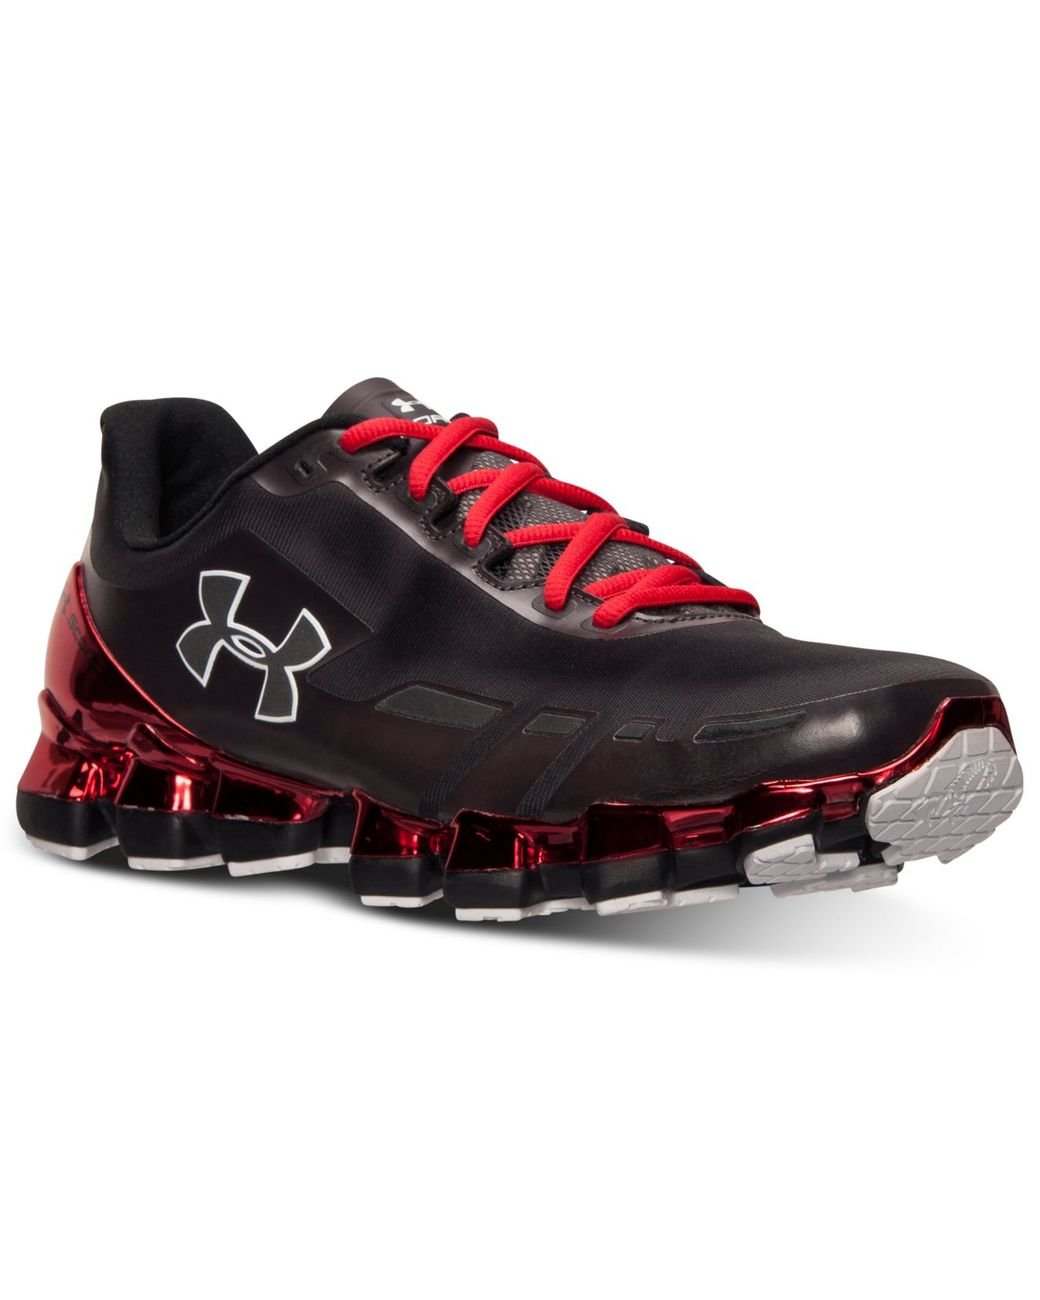 Under Armour Scorpio 3 Mens Black Running Road Sports Shoes Trainers US7-11 